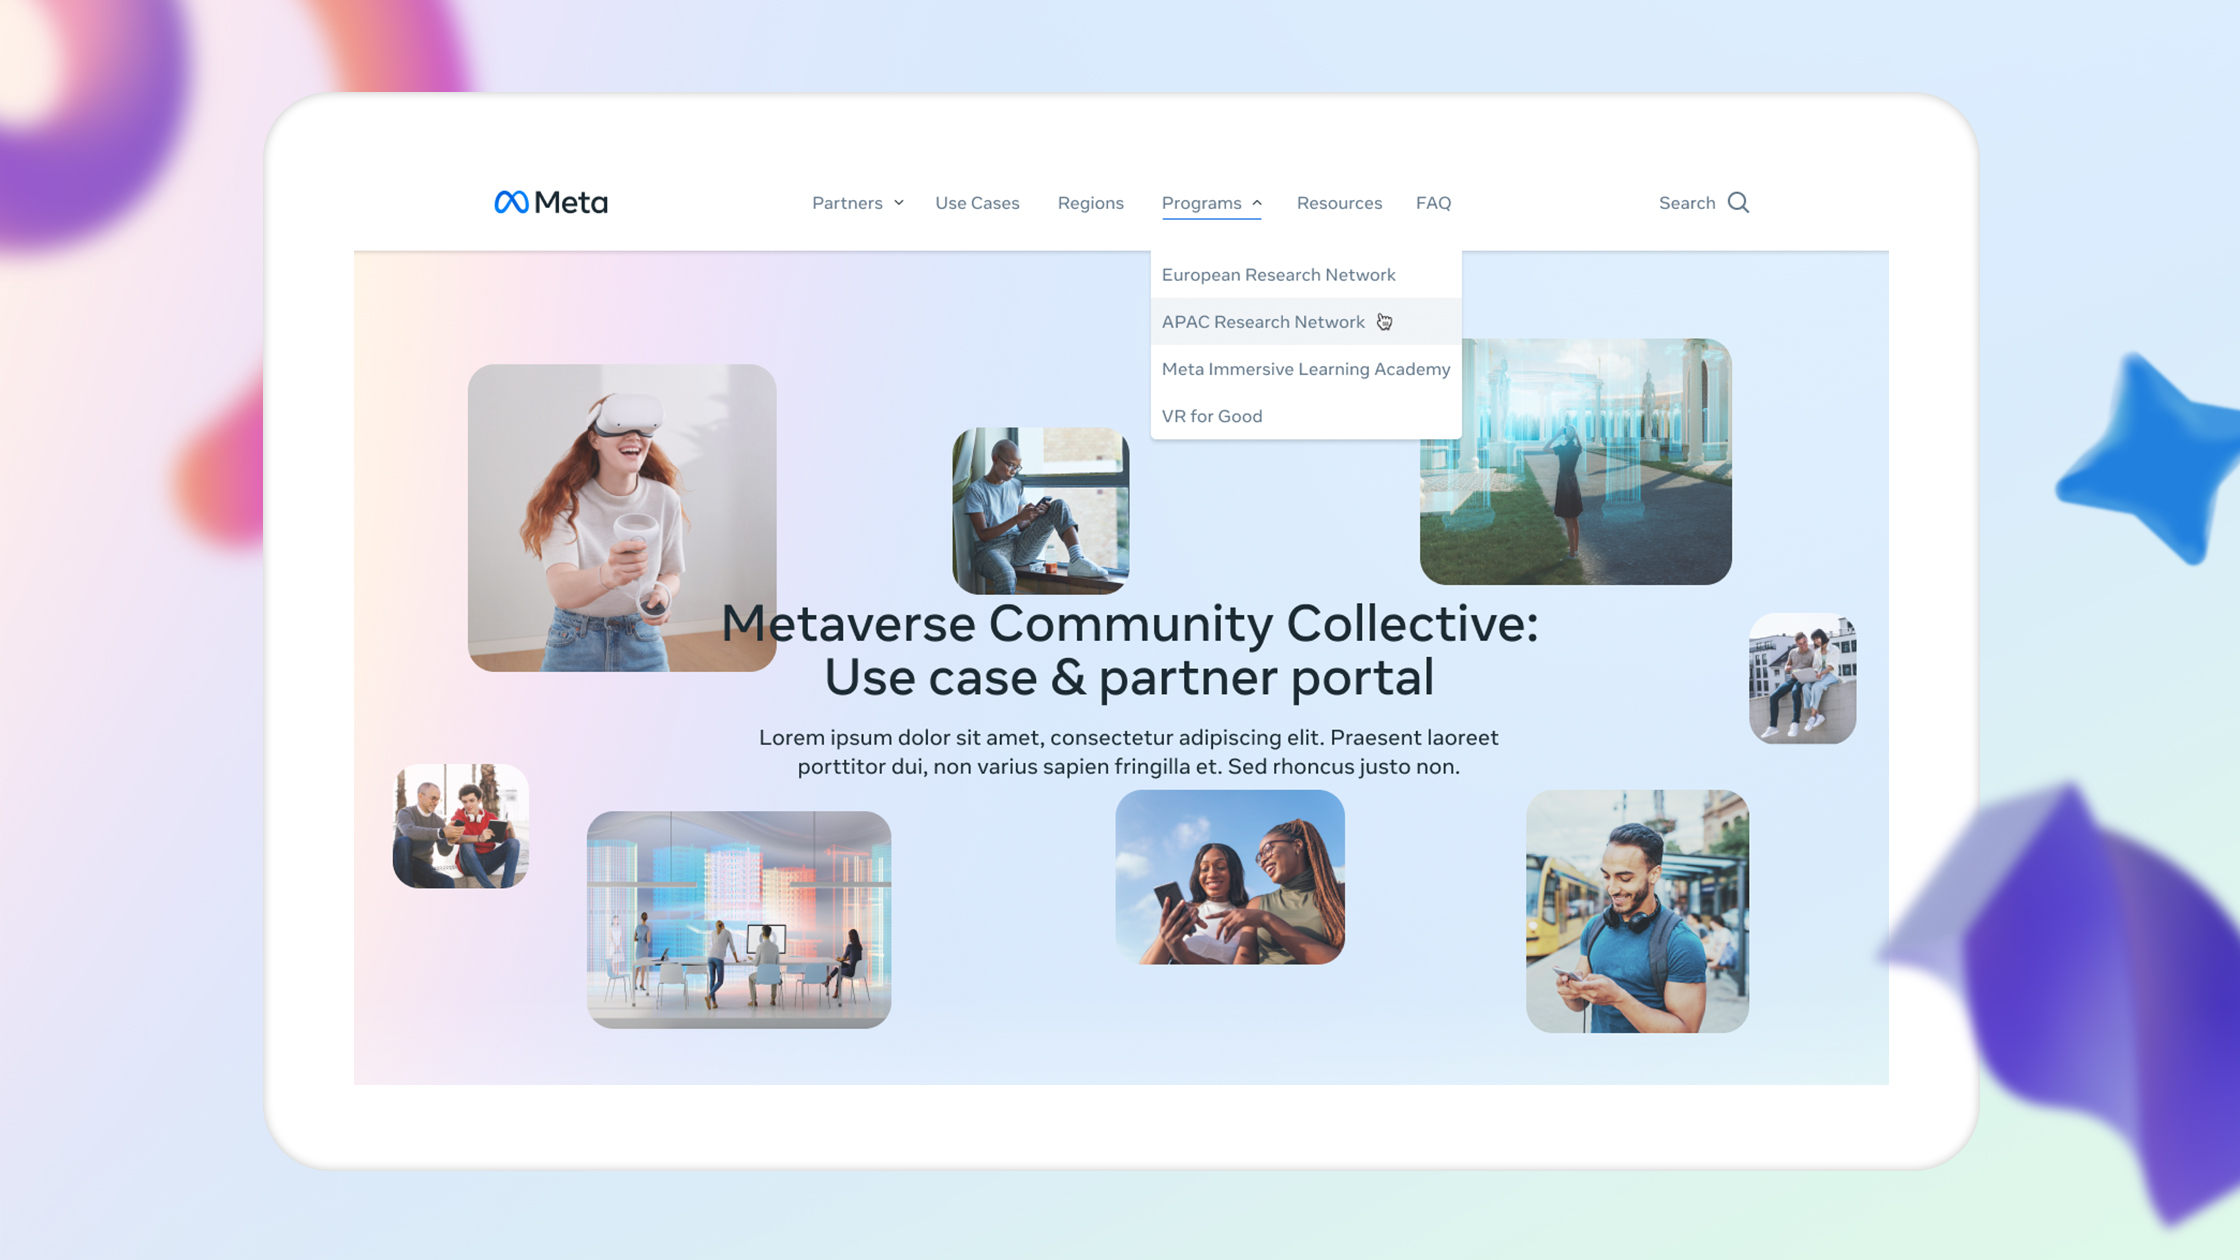 A webpage featuring the Meta logo at the top. The screen shows a headline reading "Metaverse Community Collective: Use case & partner portal" with placeholder text below. Surrounding the headline are various images of people engaging with technology and virtual environments.